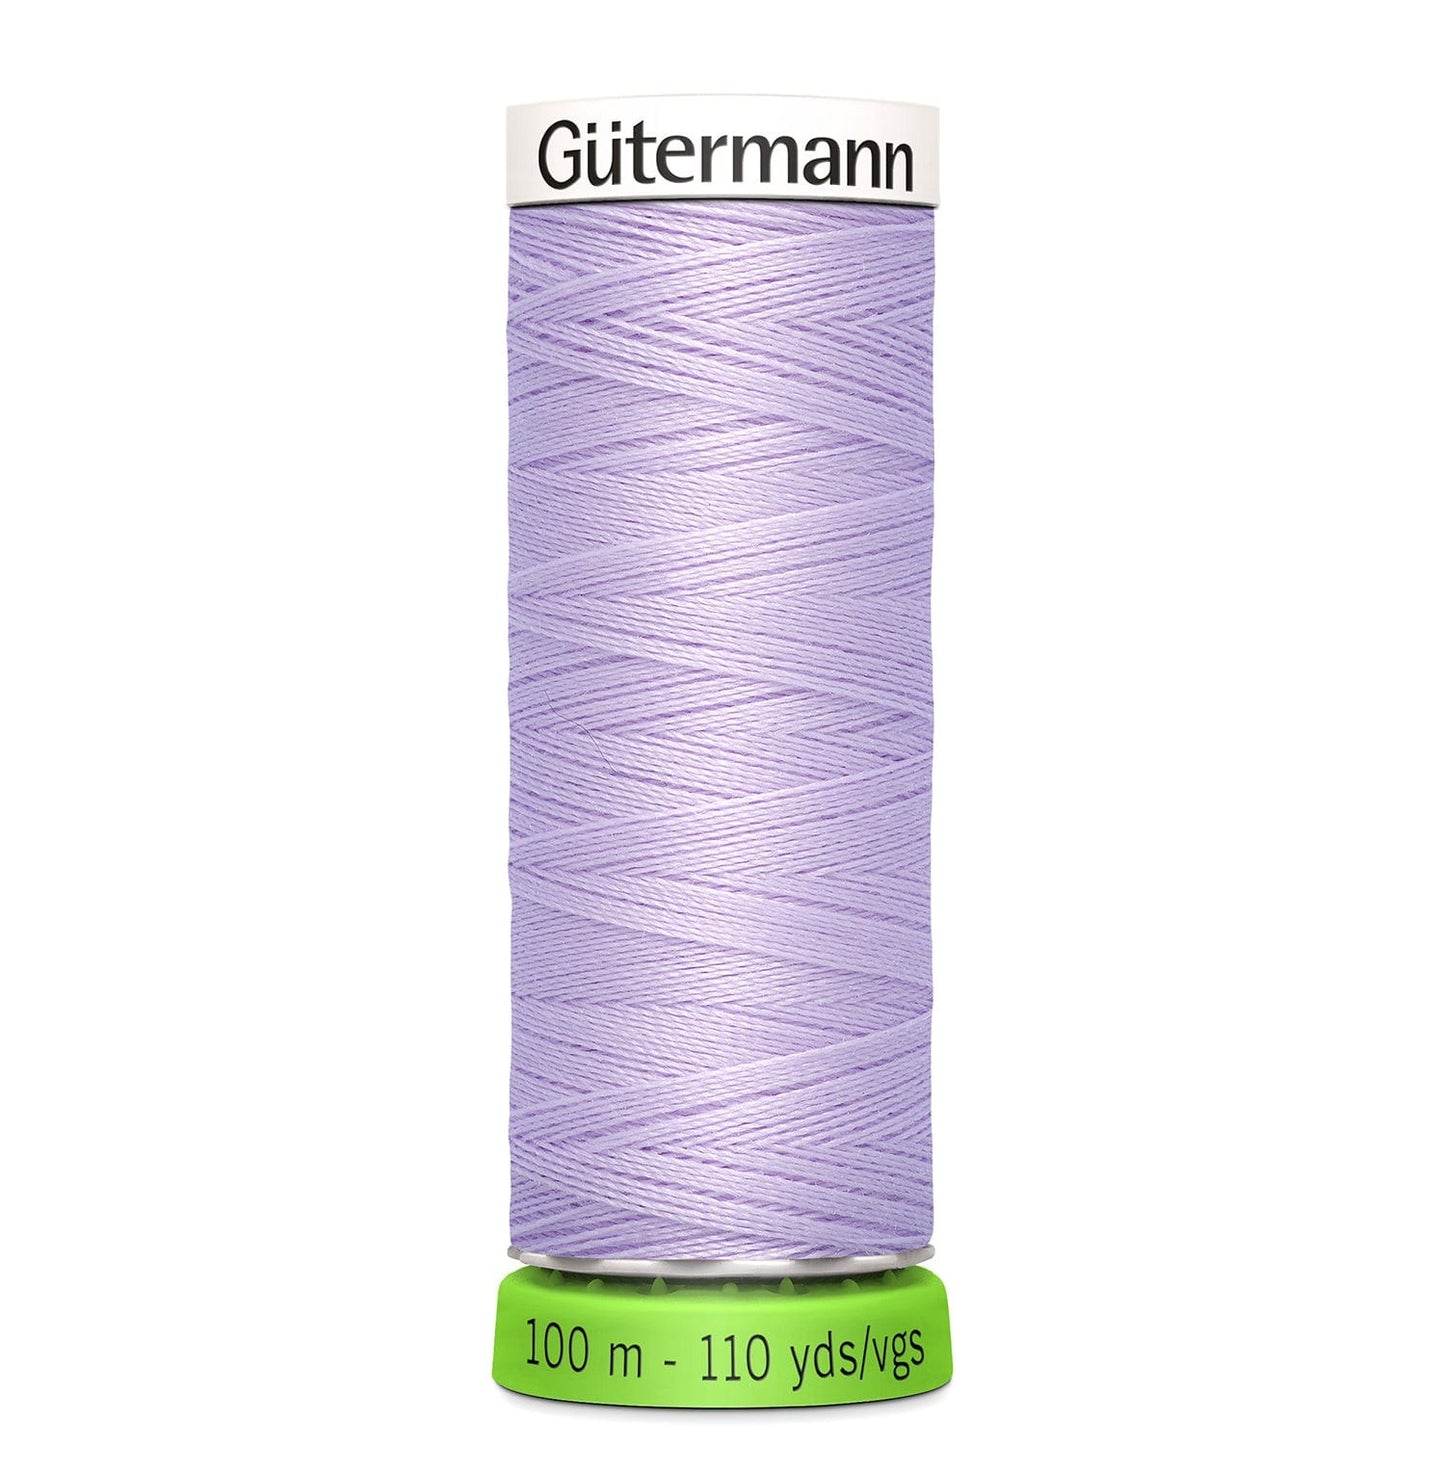 100m Reel Gütermann Recycled Sew-All Thread in Lilac no. 442